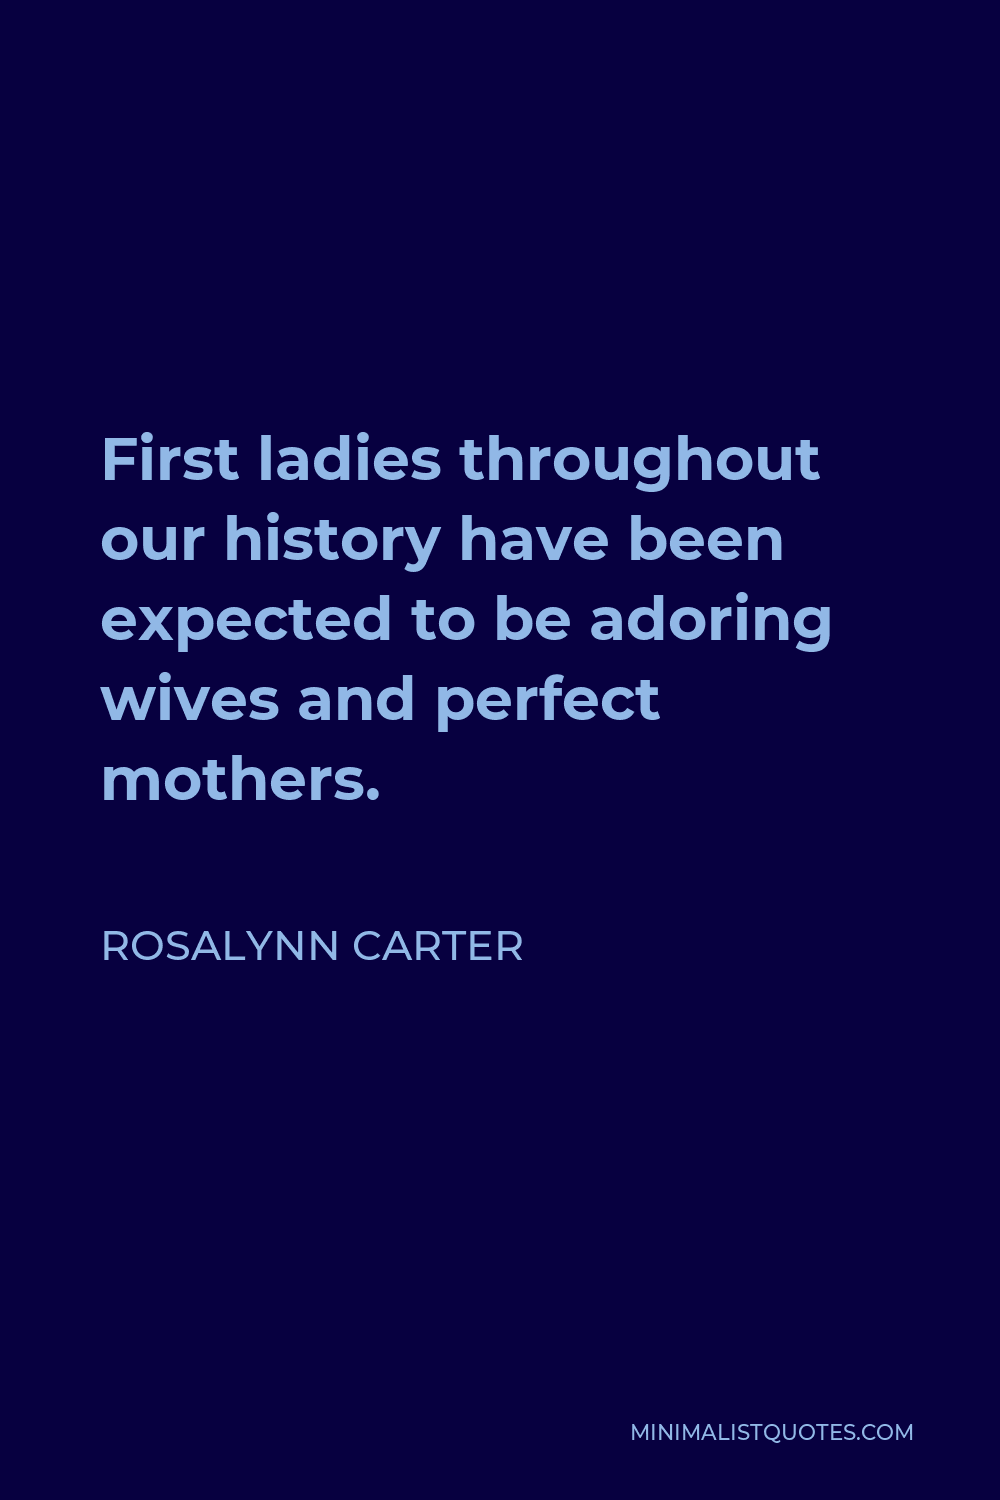 Rosalynn Carter Quote - First ladies throughout our history have been expected to be adoring wives and perfect mothers.